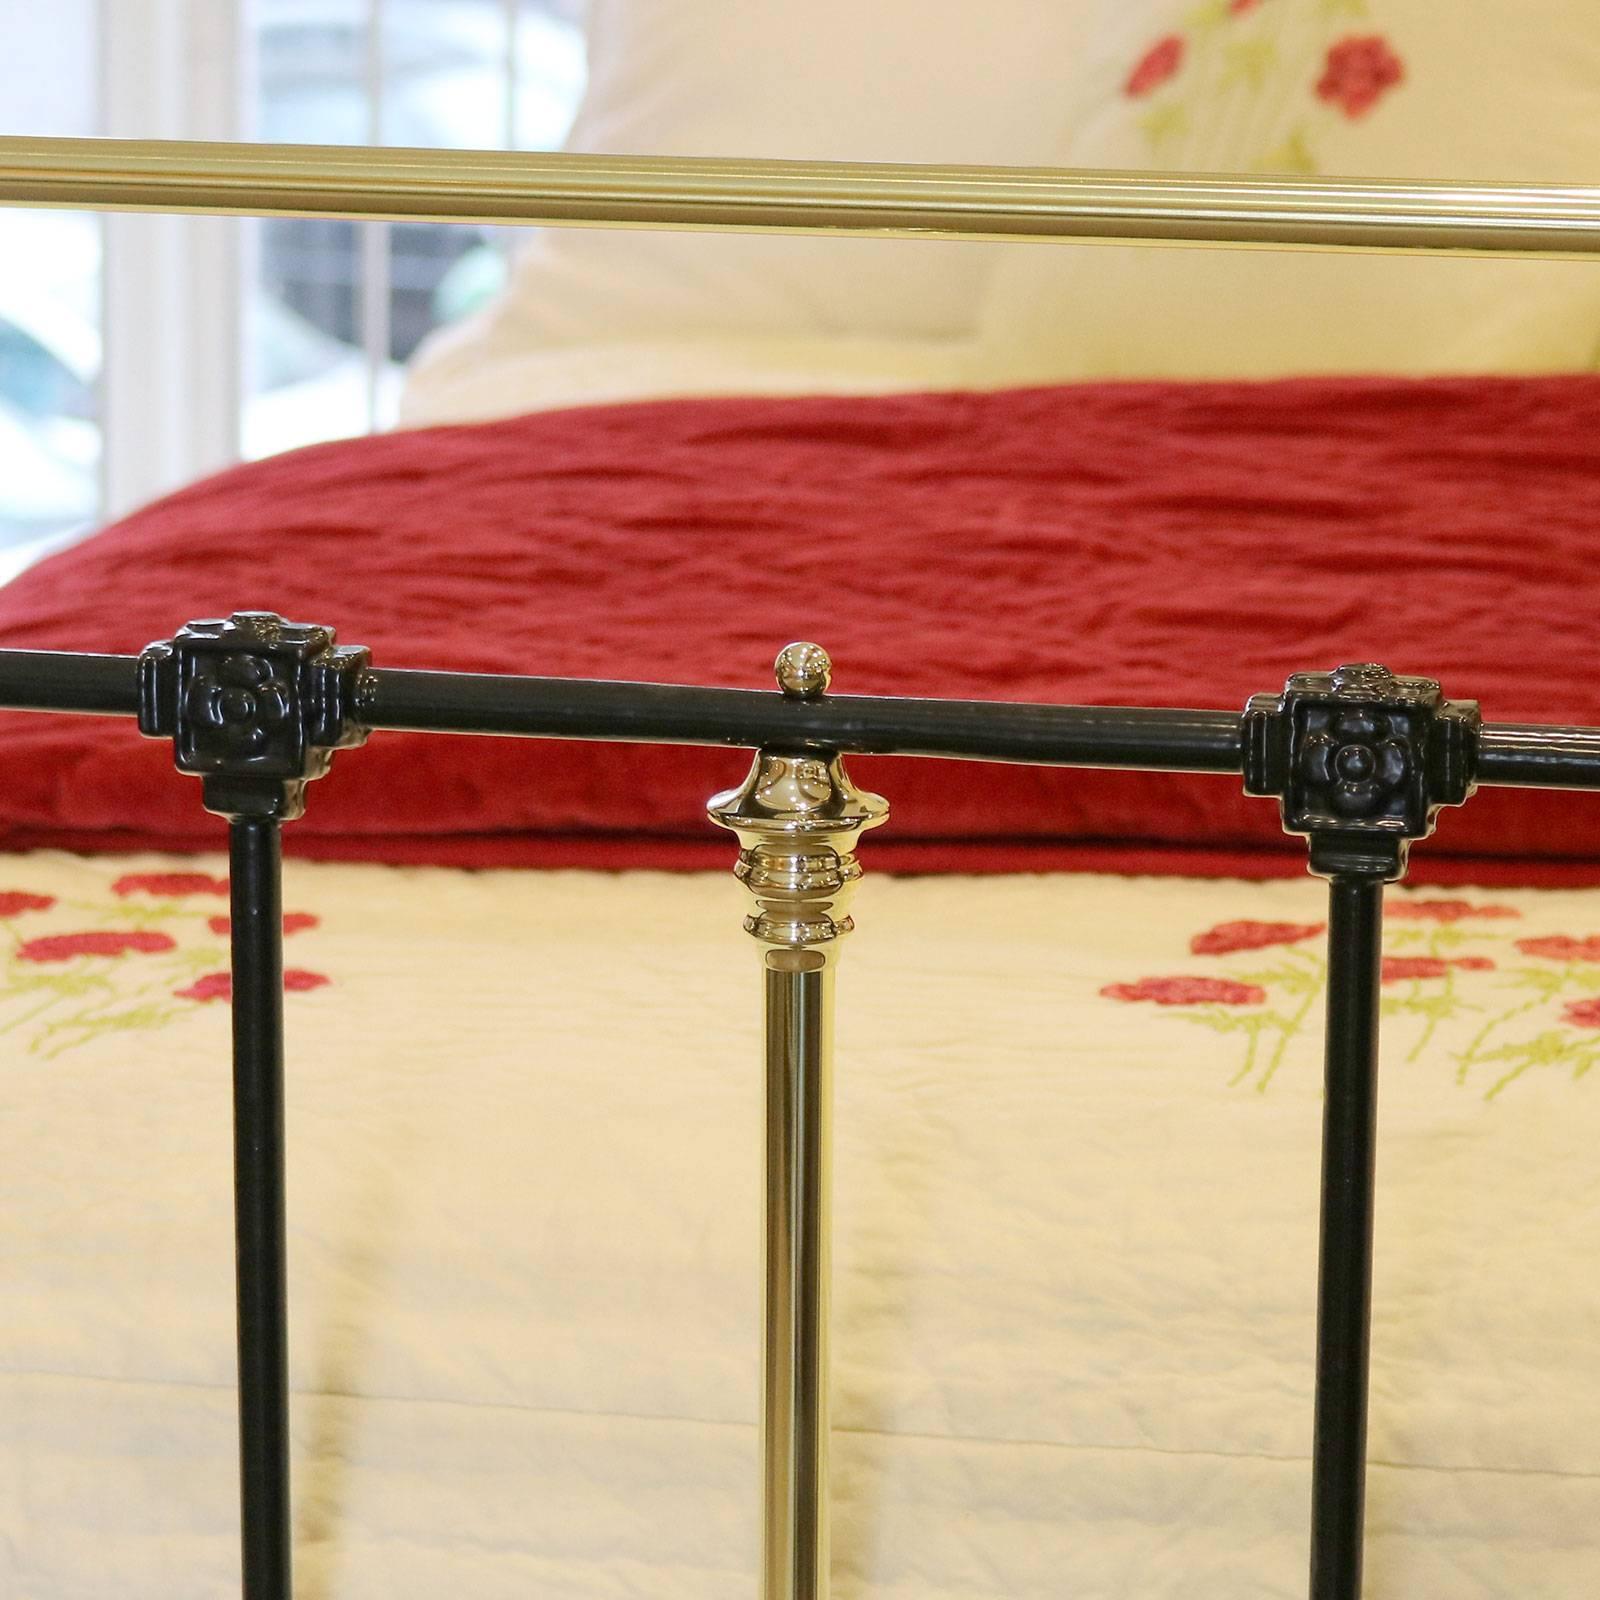 19th Century Brass and Iron Bed in Black, MK89